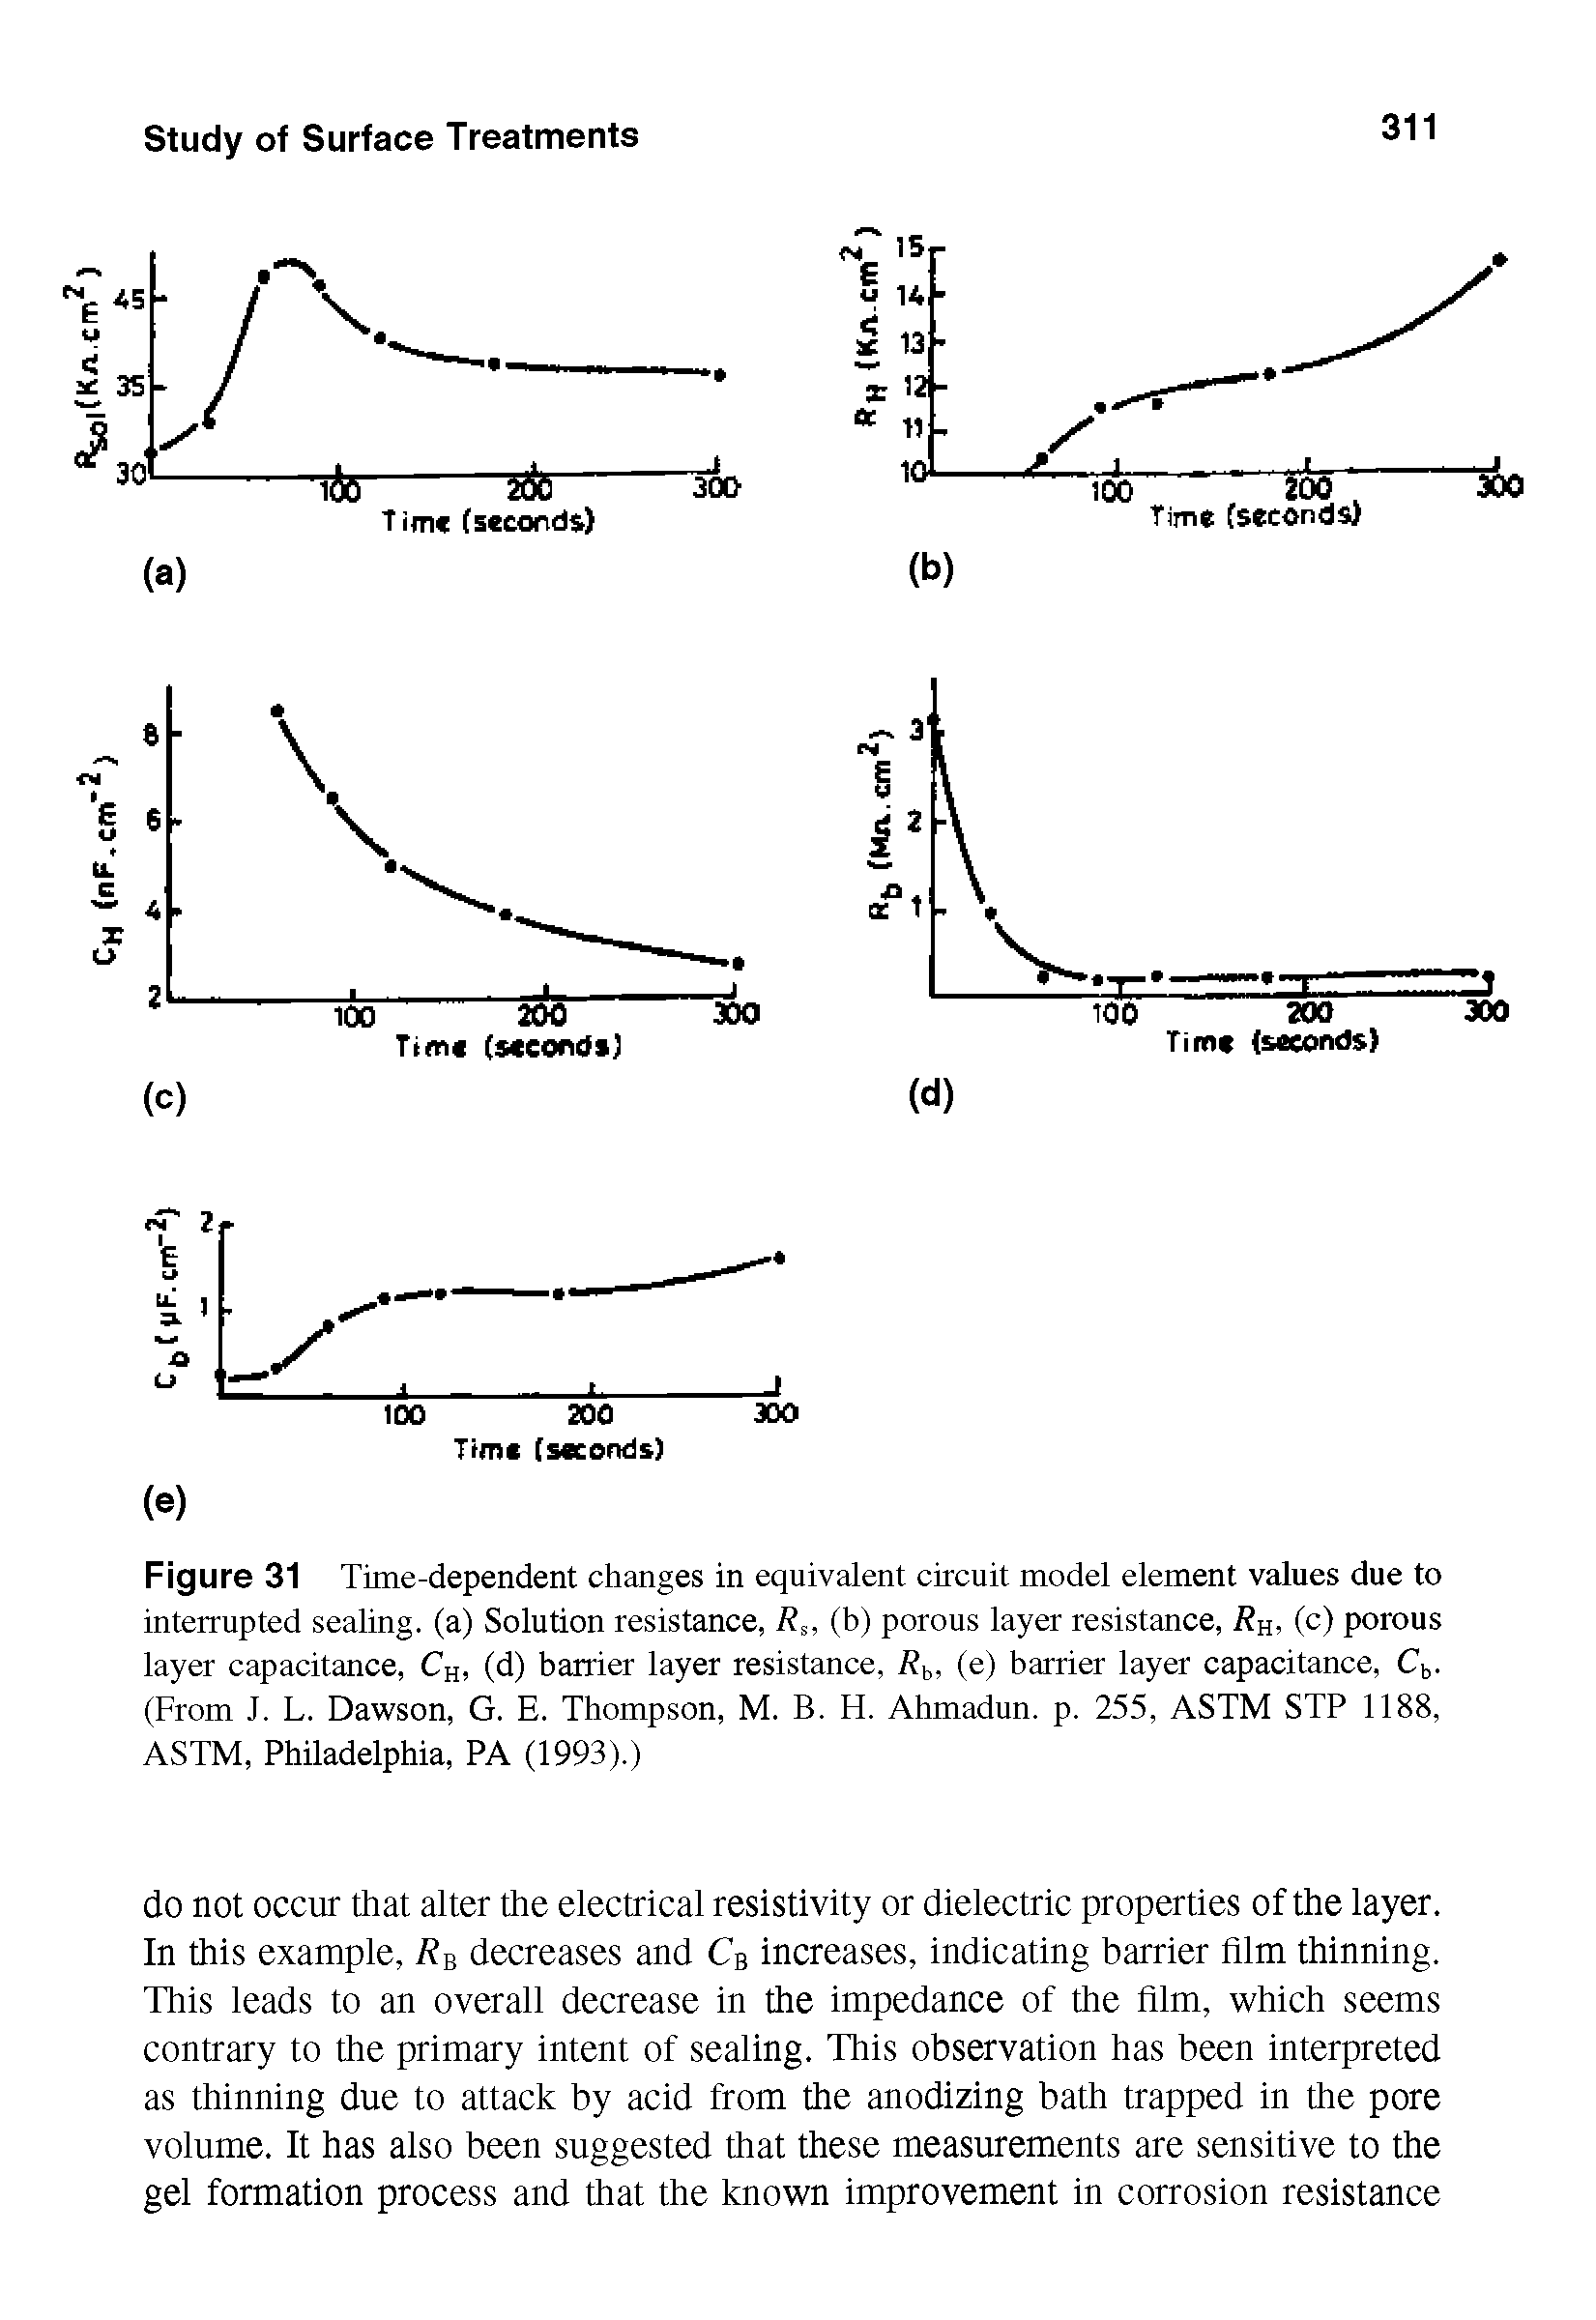 Figure 31 Time-dependent changes in equivalent circuit model element values due to interrupted sealing, (a) Solution resistance, Rs, (b) porous layer resistance, Ra, (c) porous layer capacitance, CH, (d) barrier layer resistance, Rb, (e) barrier layer capacitance, Cb. (From J. L. Dawson, G. E. Thompson, M. B. H. Ahmadun. p. 255, ASTM STP 1188, ASTM, Philadelphia, PA (1993).)...